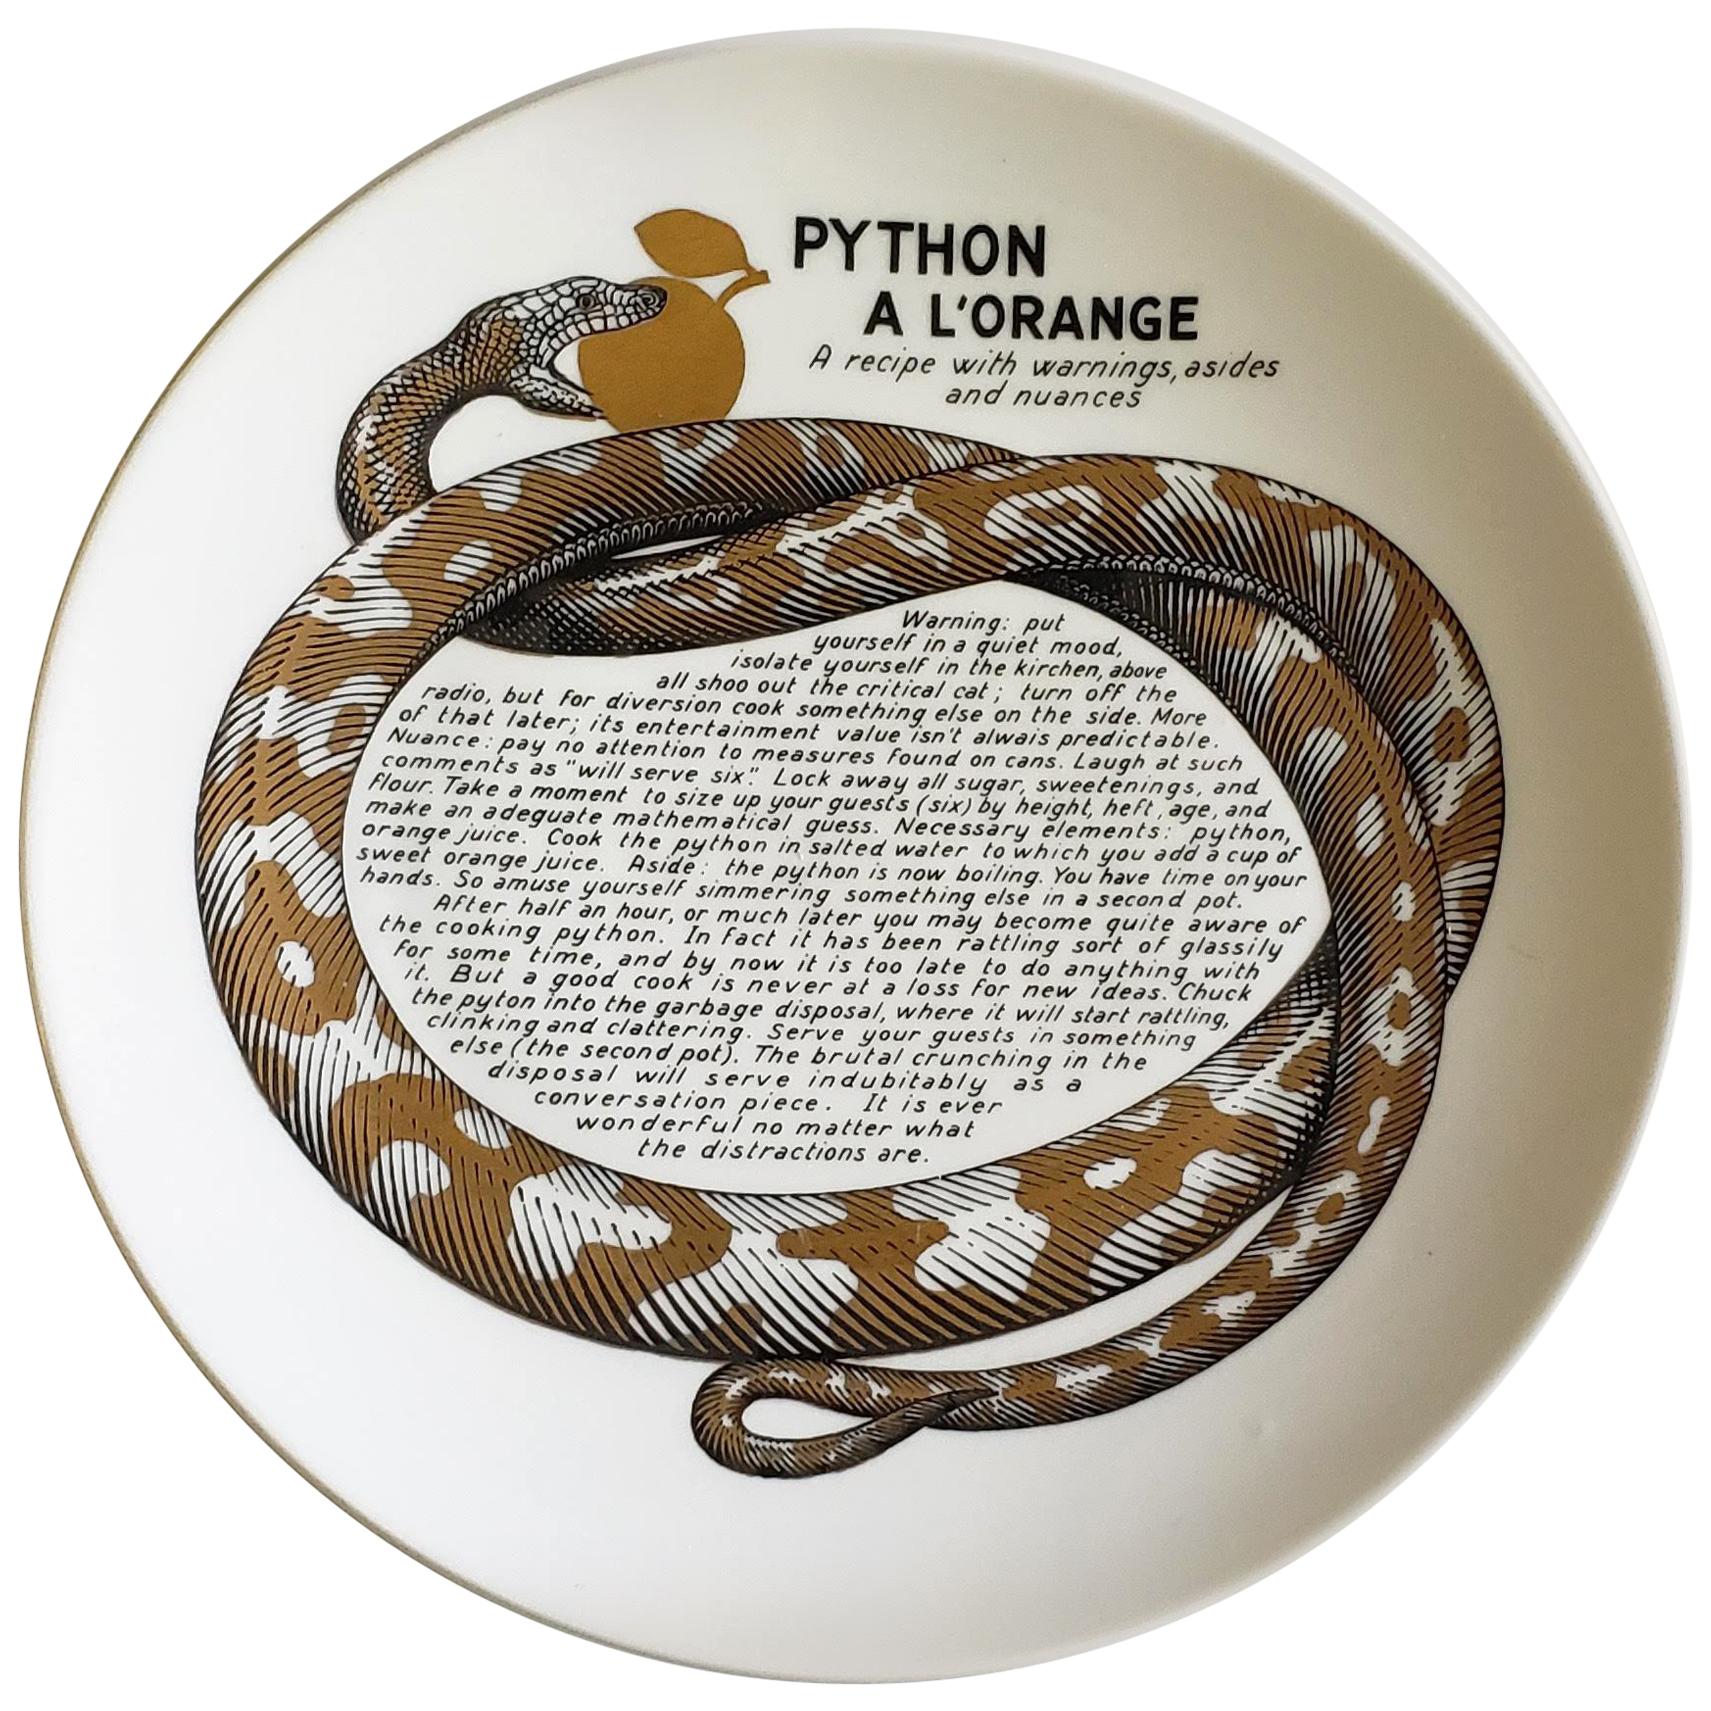 Piero Fornasetti Fleming Joffe Porcelain Recipe plate,
Python a la Orange,
1960s-1974.

This rare Piero Fornasetti porcelain plate is from a series of fourteen made for the Fleming Joffe company in New York City.

The plate originally was in a